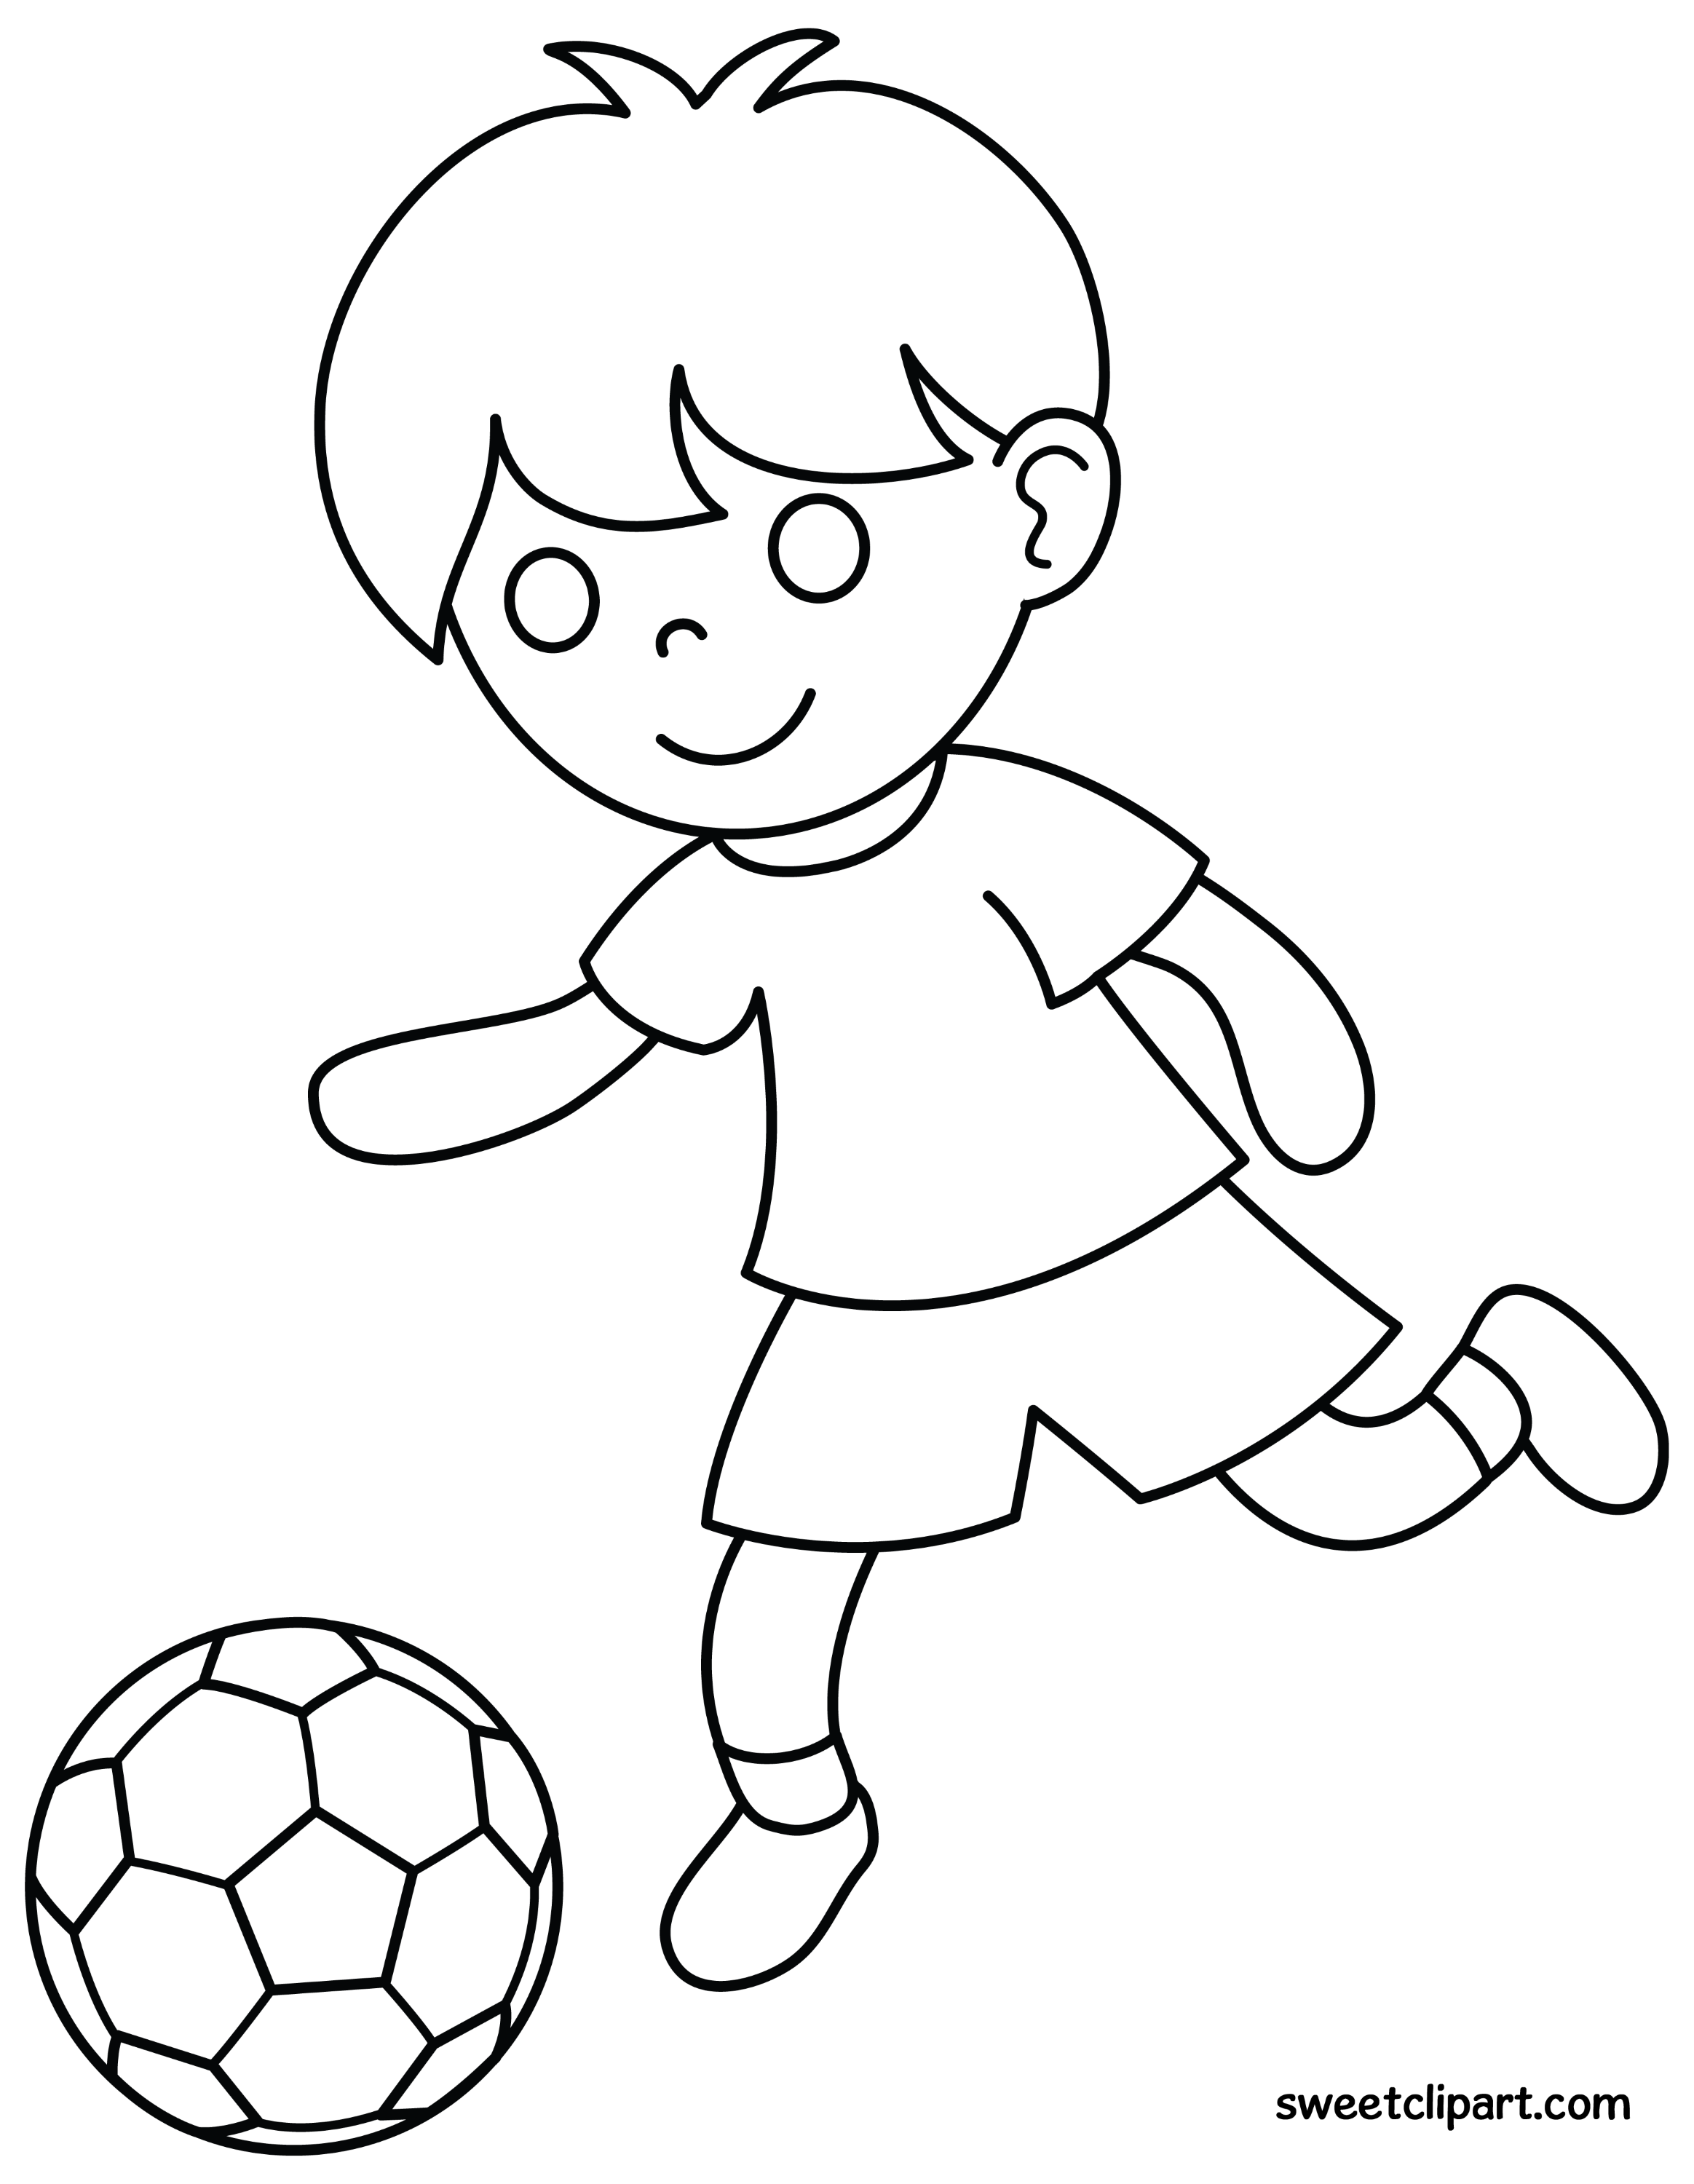 How To Draw A Boy Playing Football Easy - Auto Ken